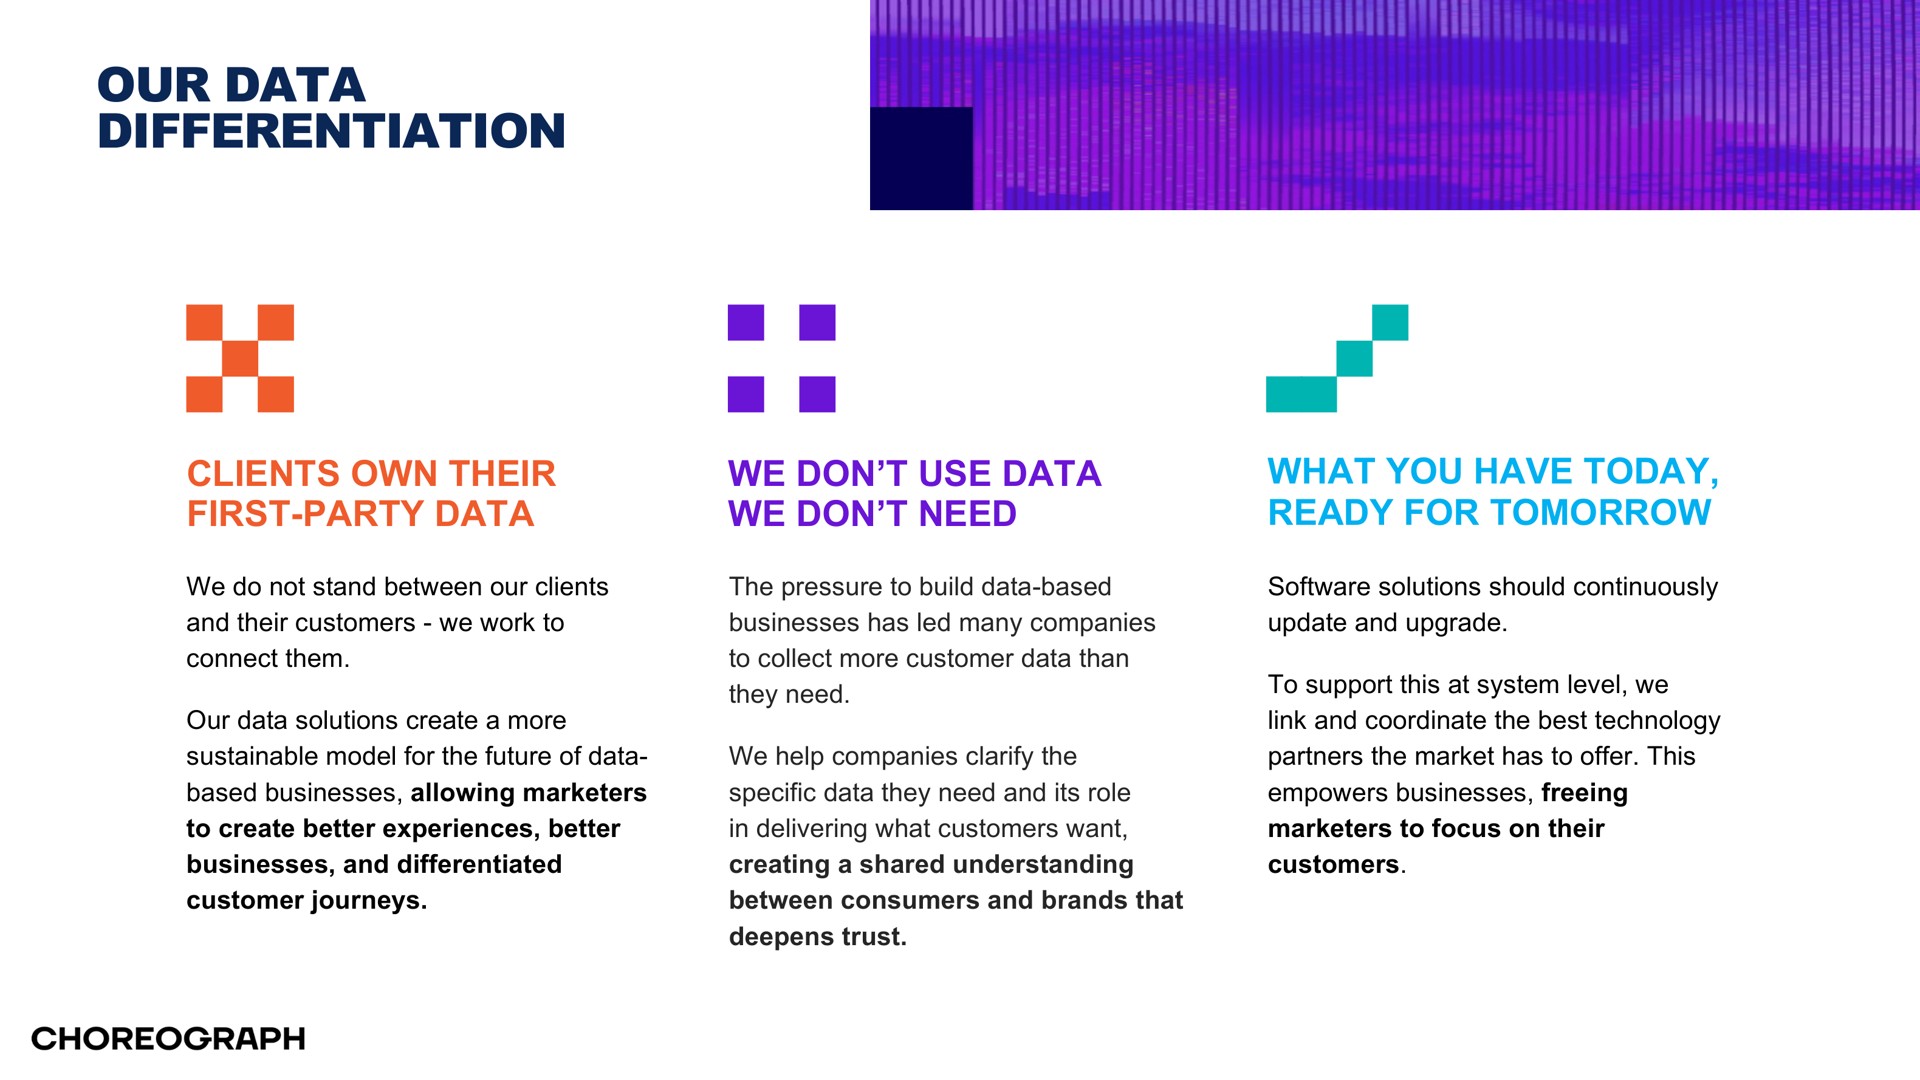 our data differentiation | WPP